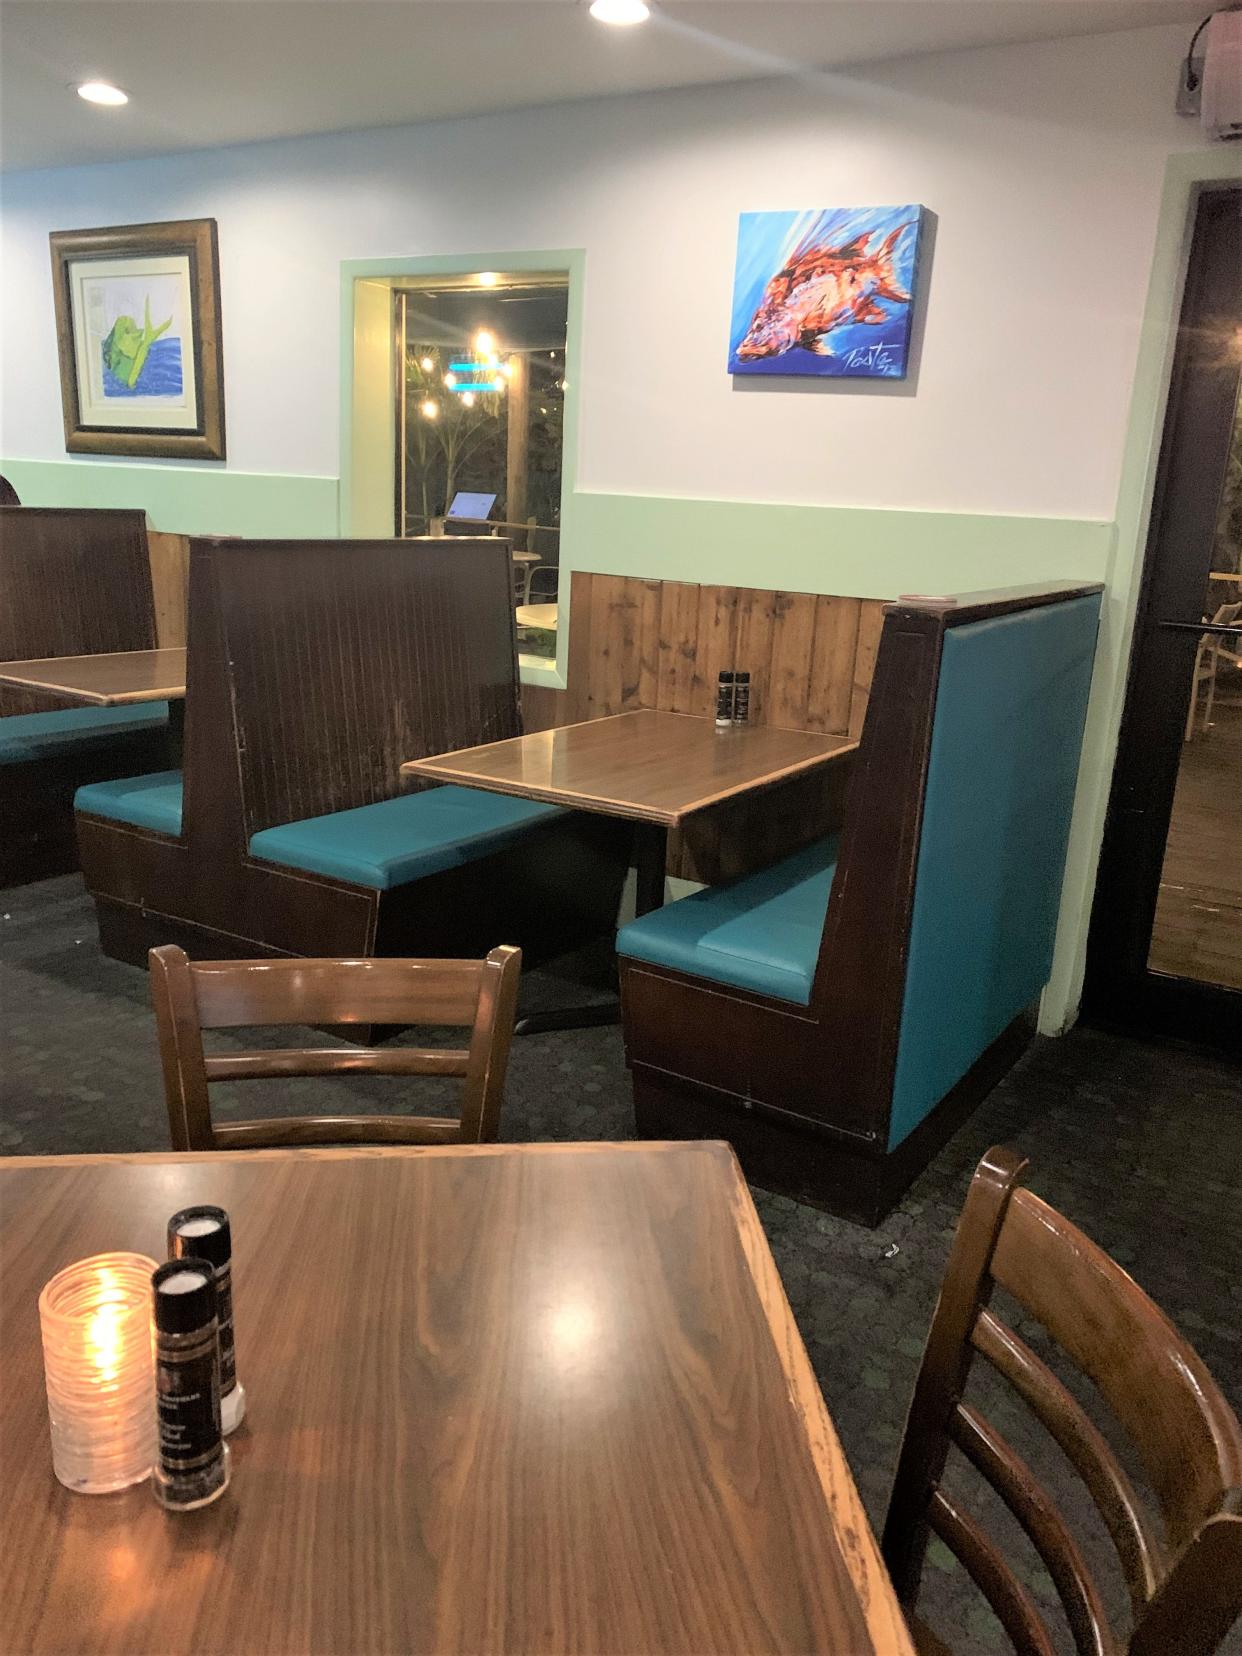 The main dining area at 12A Buoy features teal leather and wood booths or wooden tables and chairs.